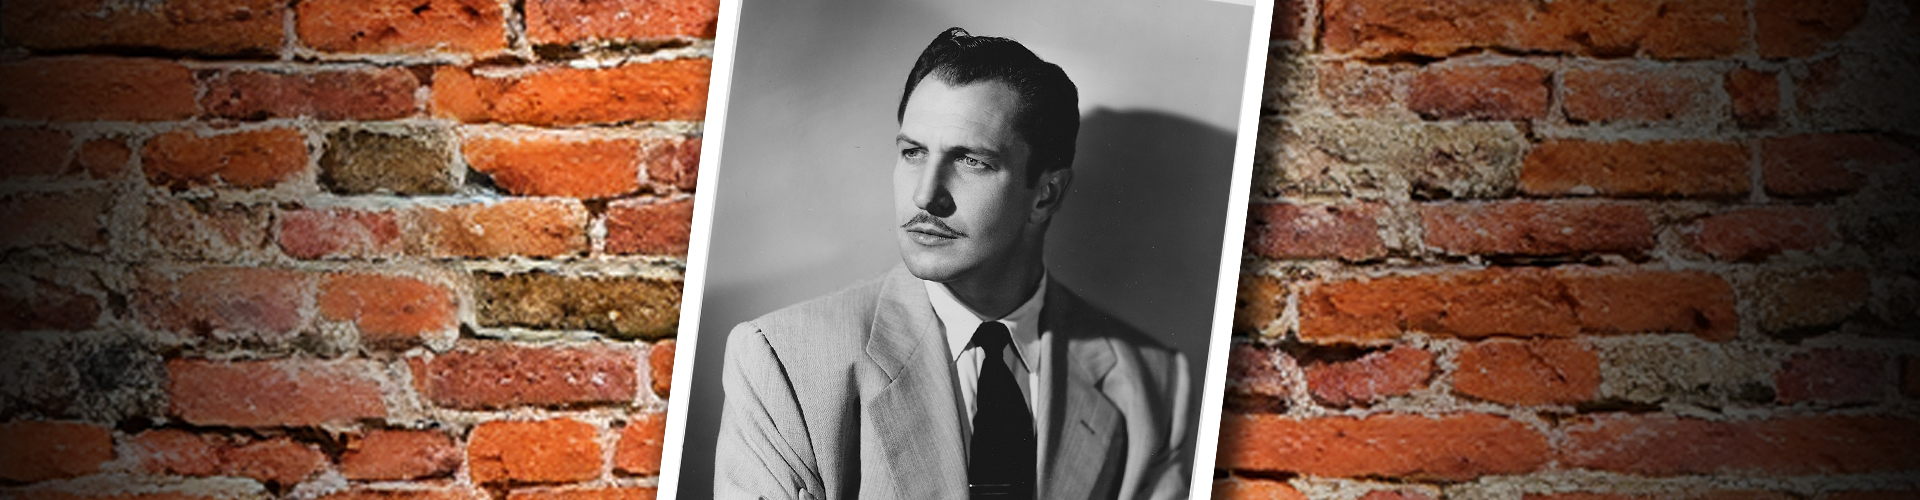 vincent price featured